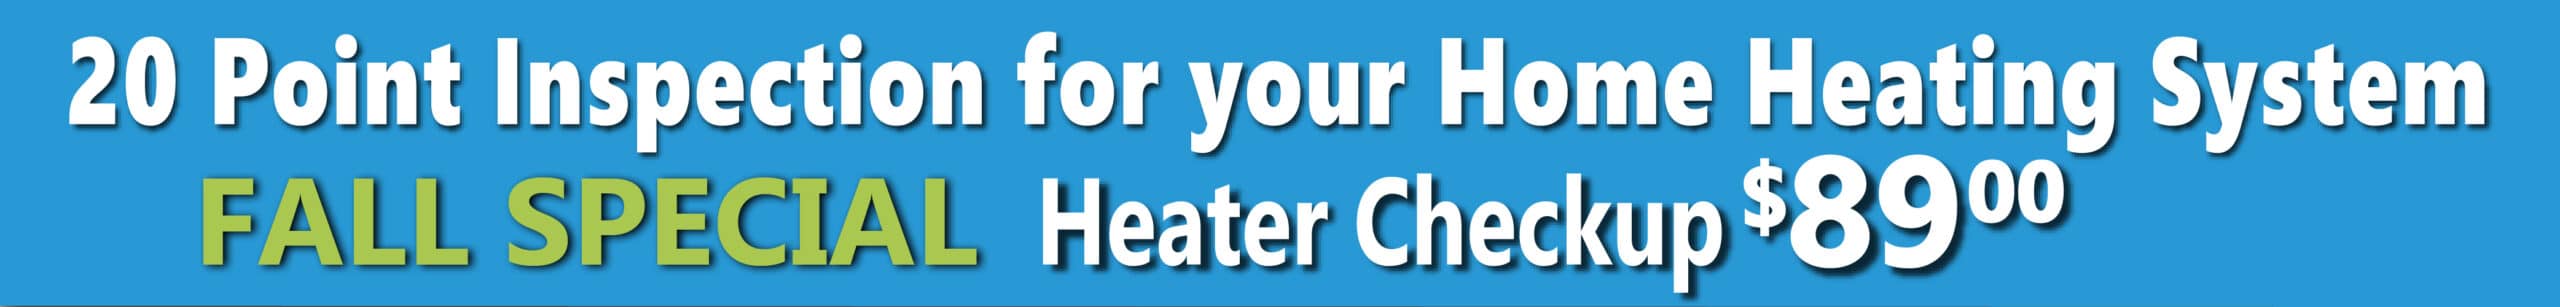 20 Point inspection of Your Home Heating System - Fall Special Heater Checkup - $89.00